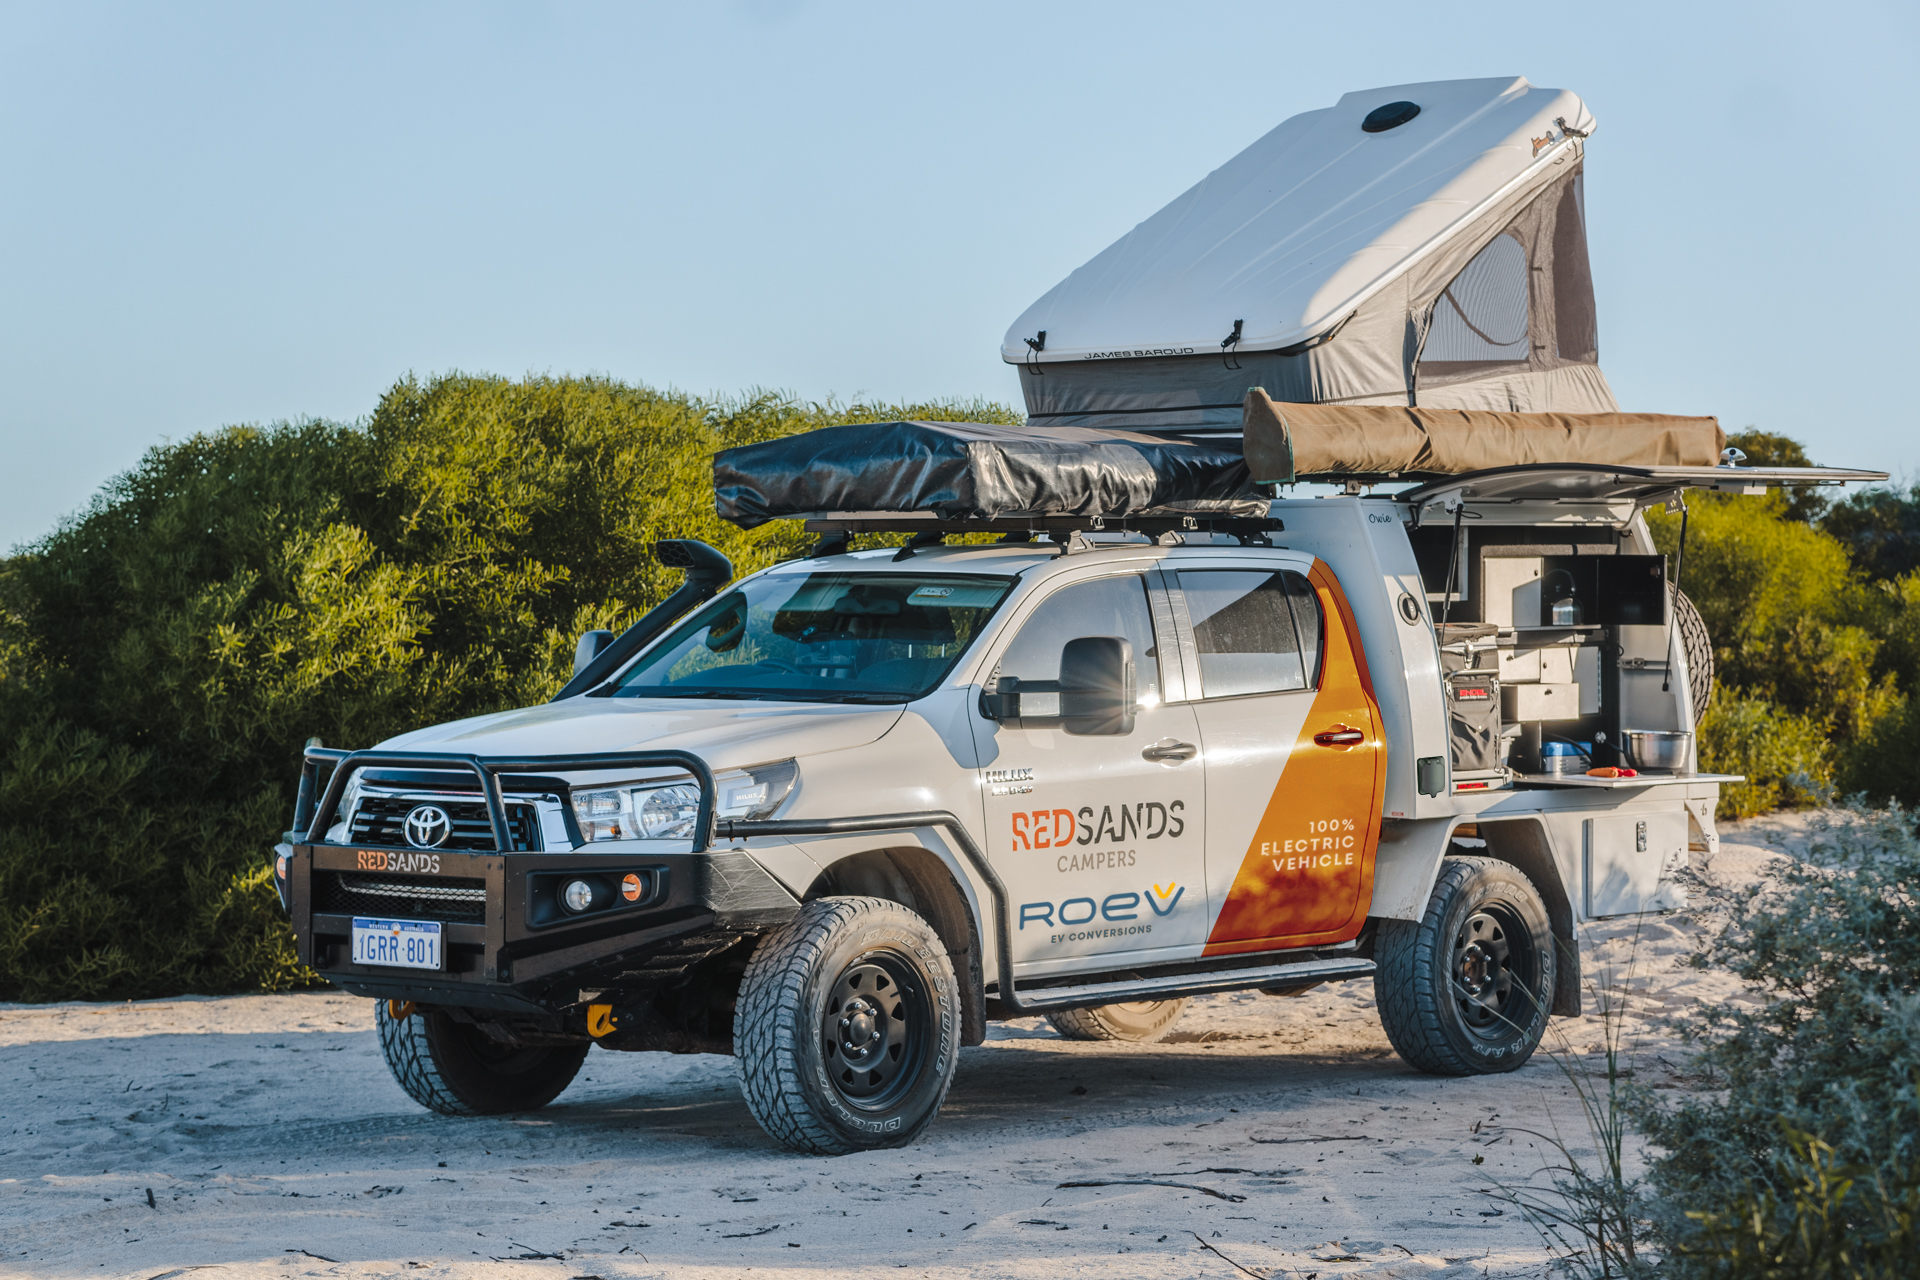 RedSands and Roev to make Australia’s first fully electric 4WD camper